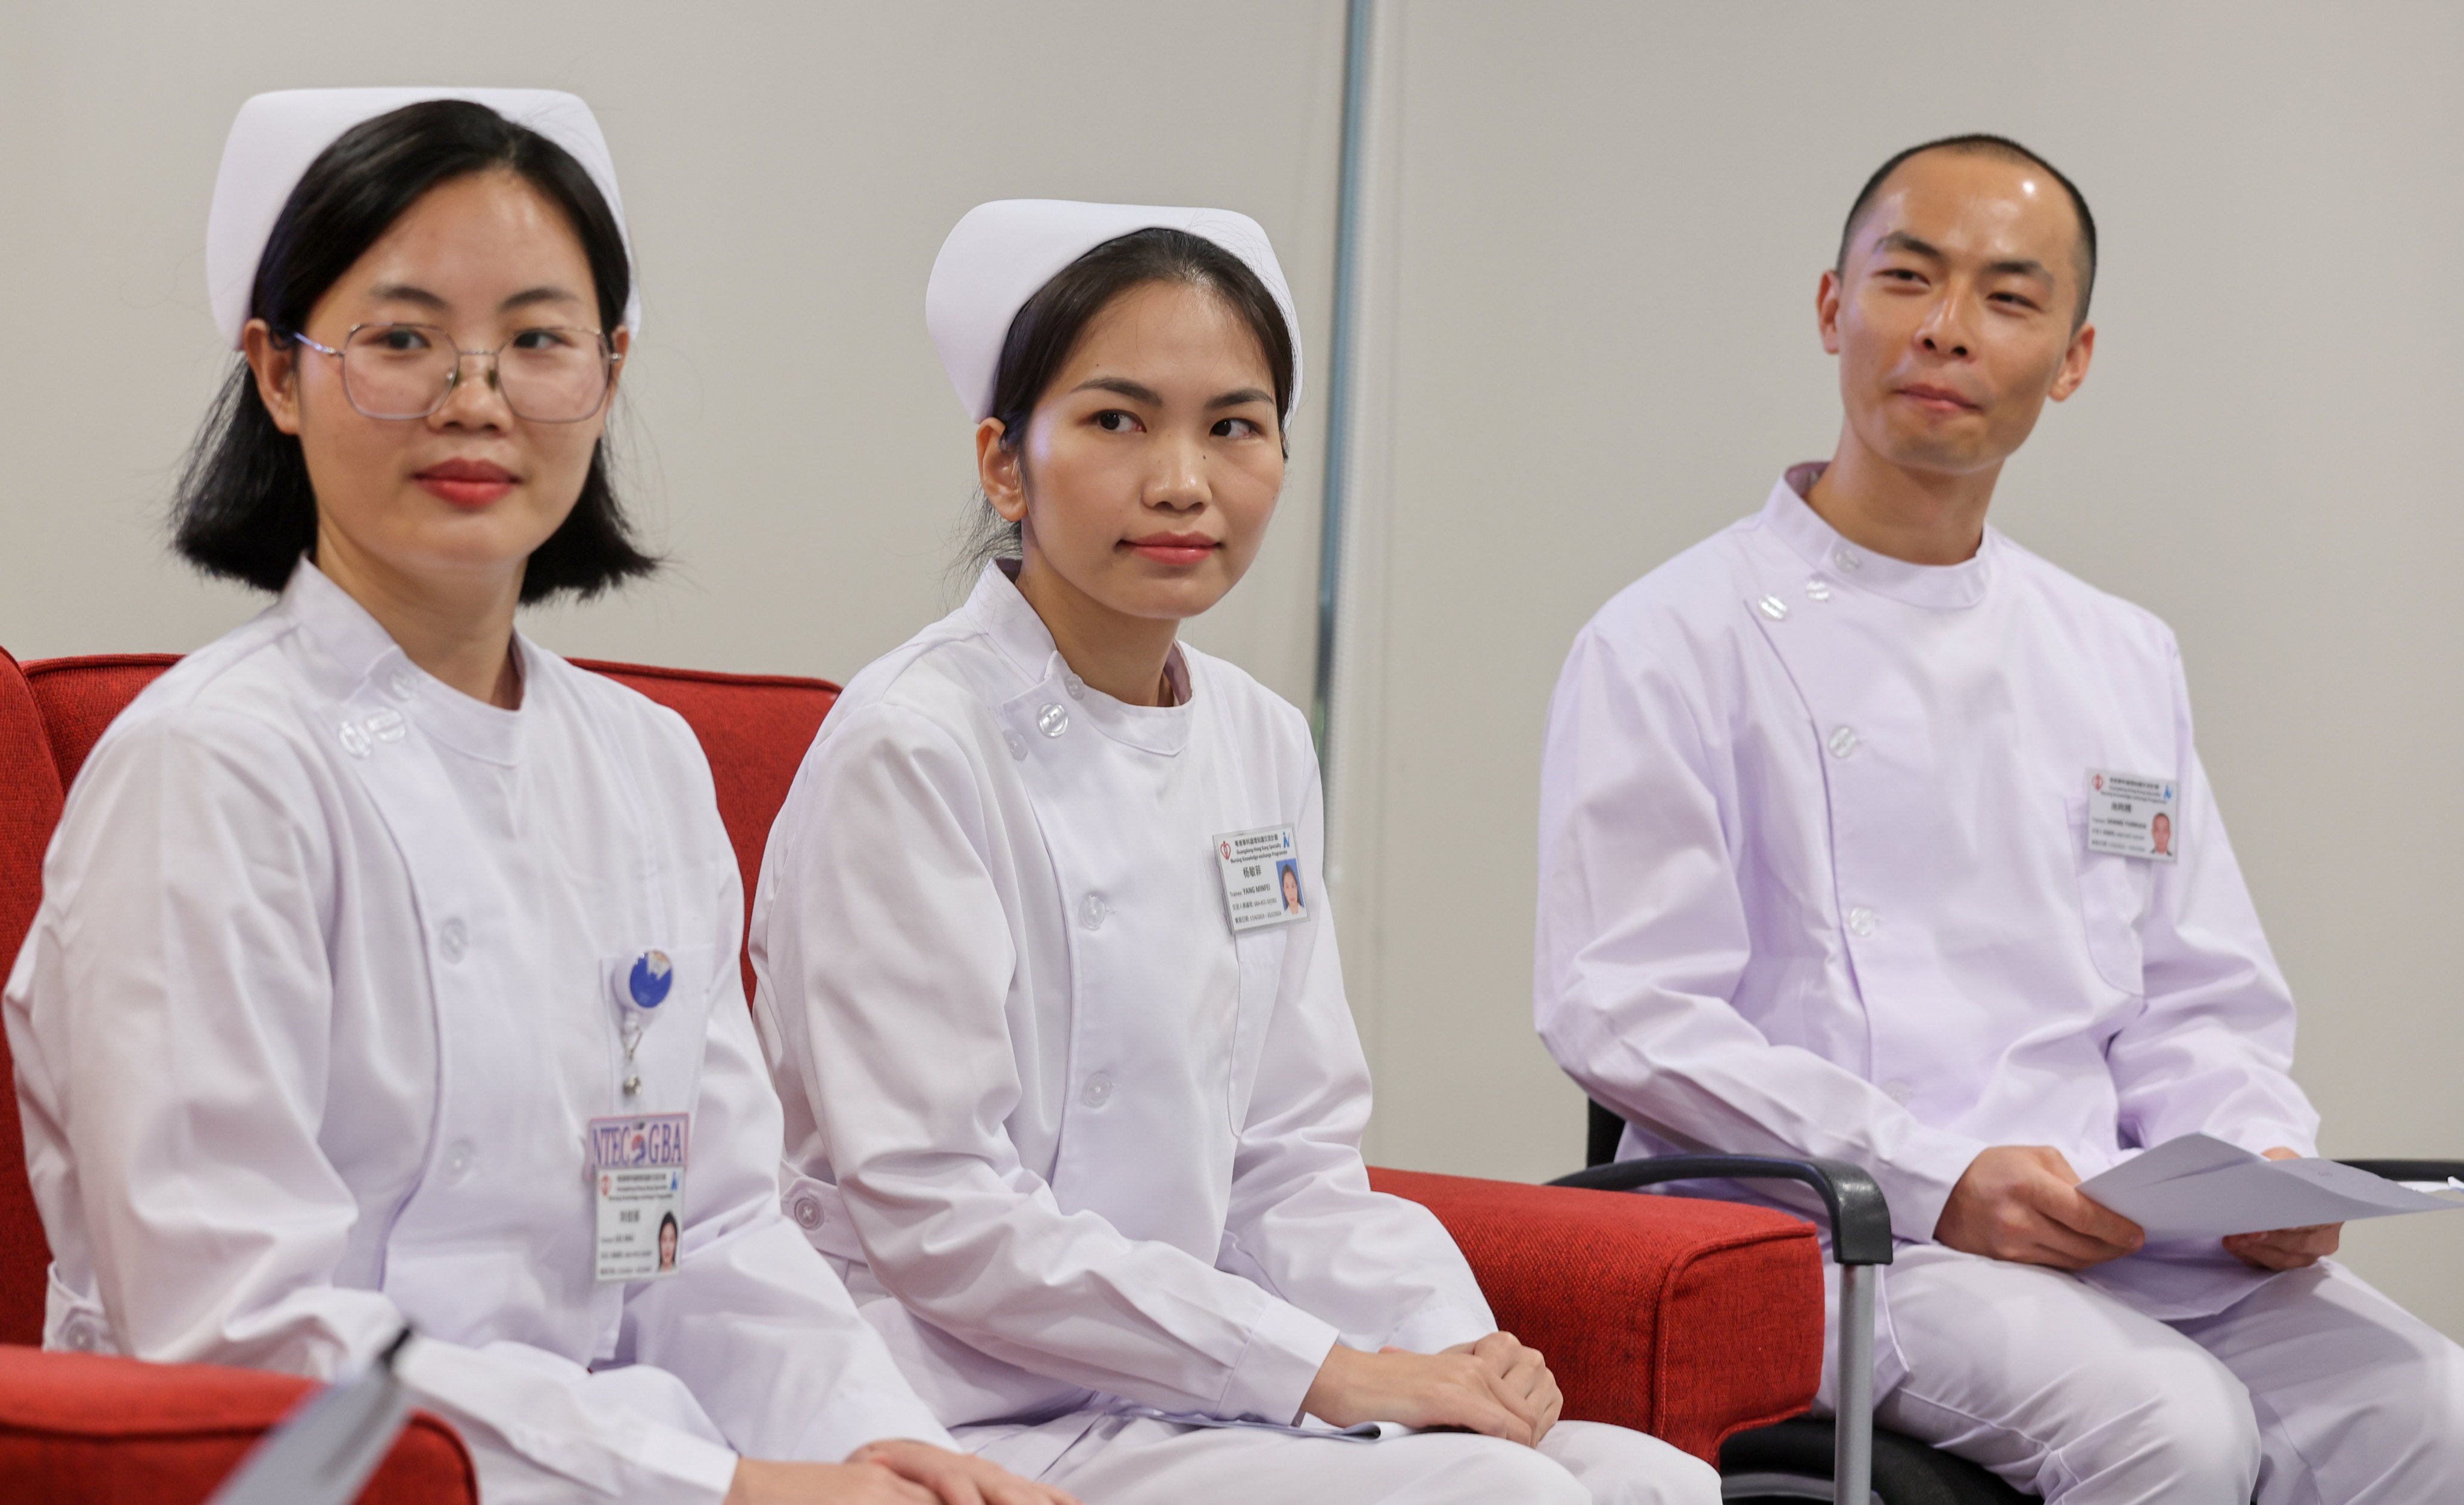 Nurses from Guangdong province on an exchange programme with Hong Kong public hospitals. Photo: Yik Yeung-man